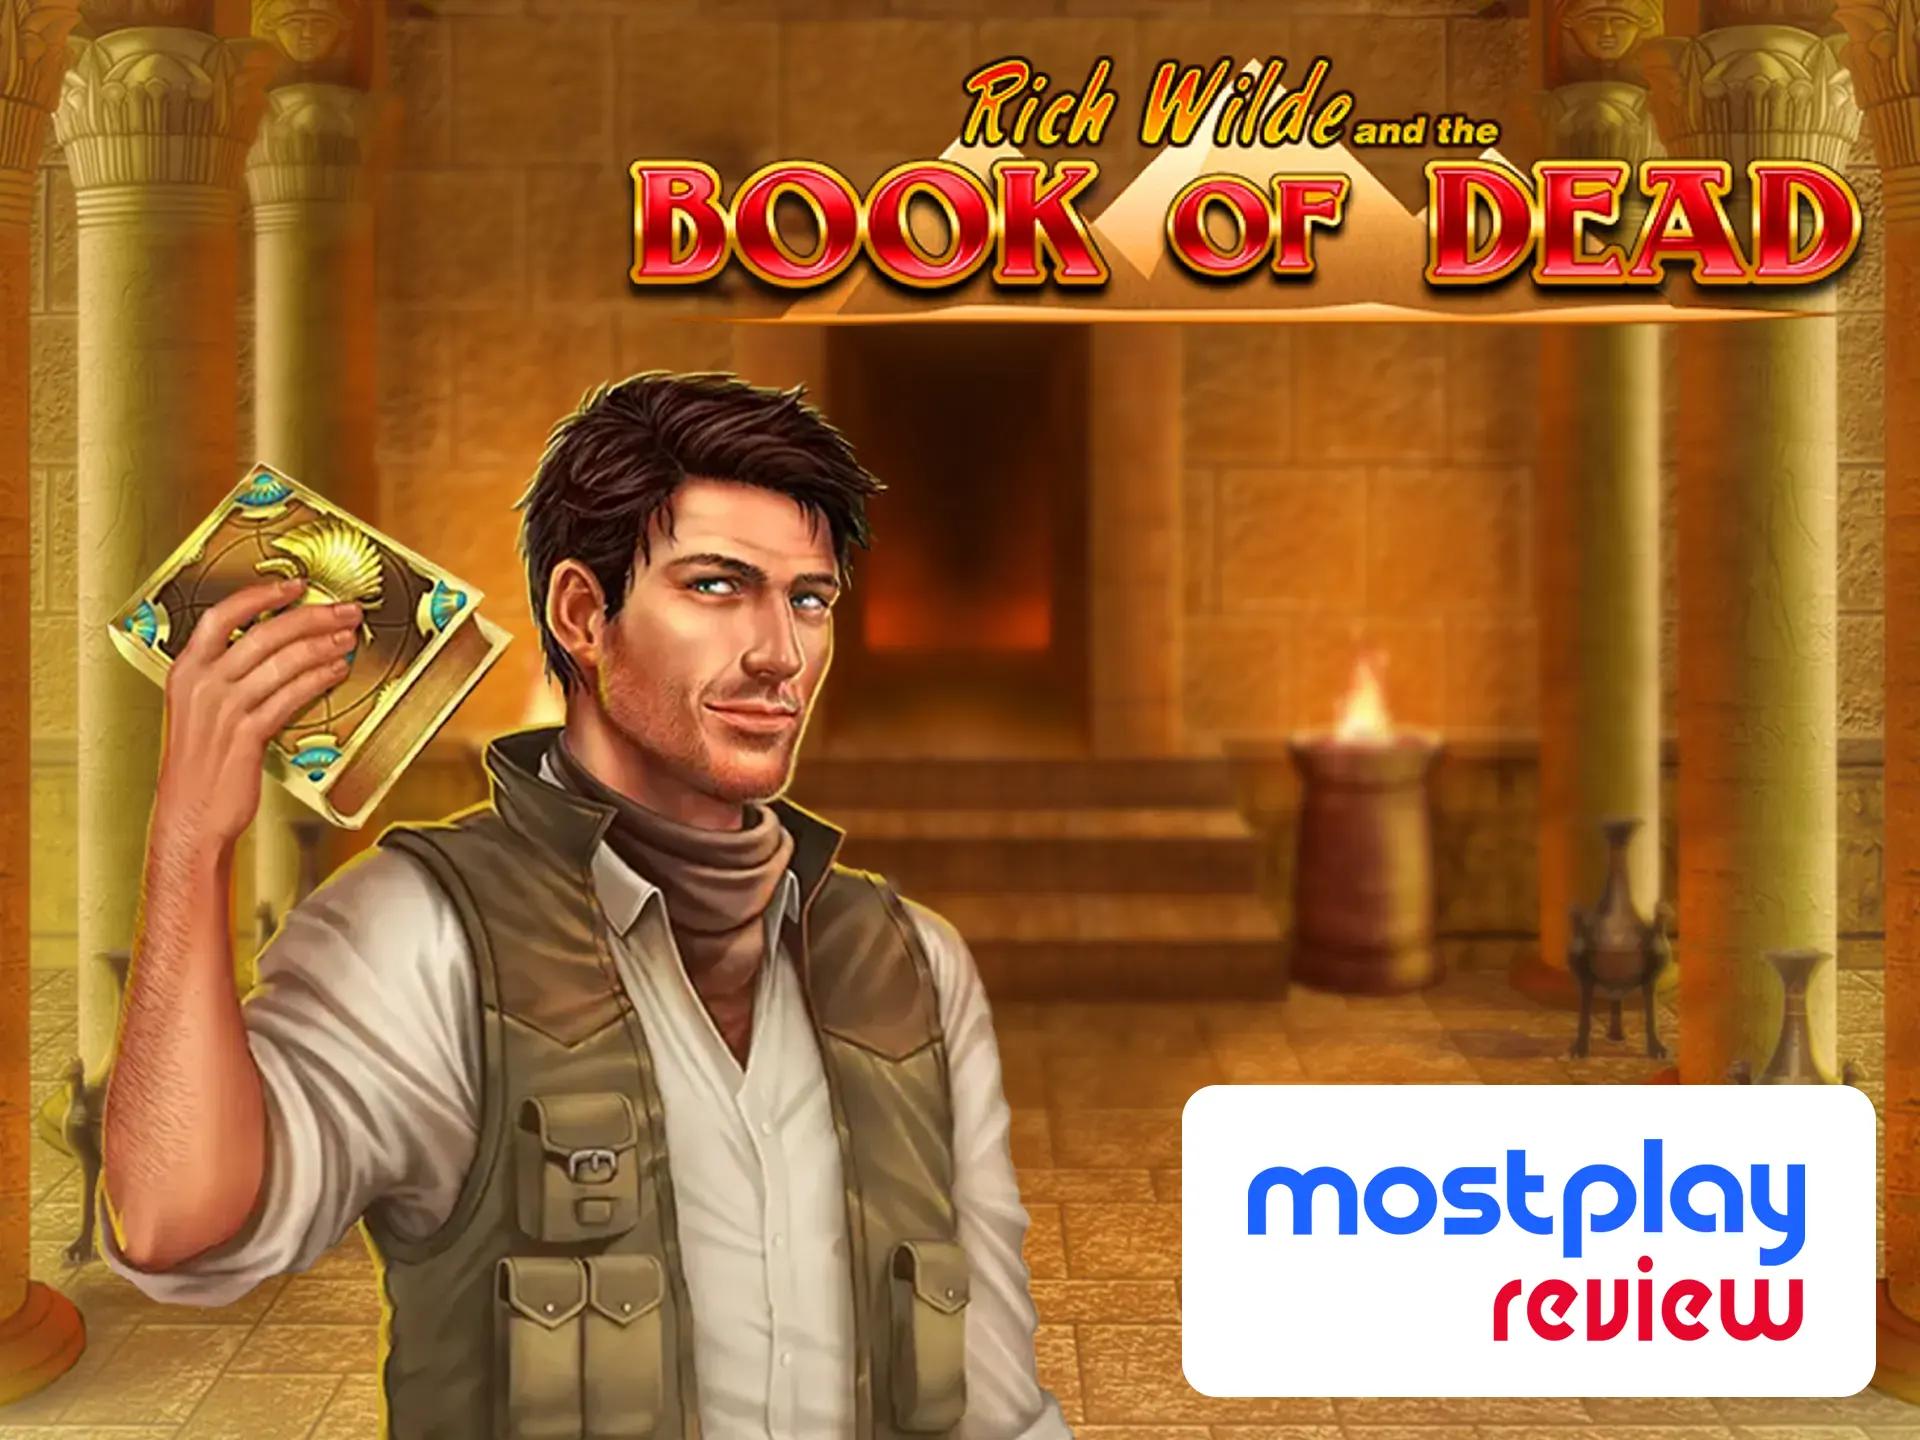 Solve the mystery of the Book of Dead and win your prize.